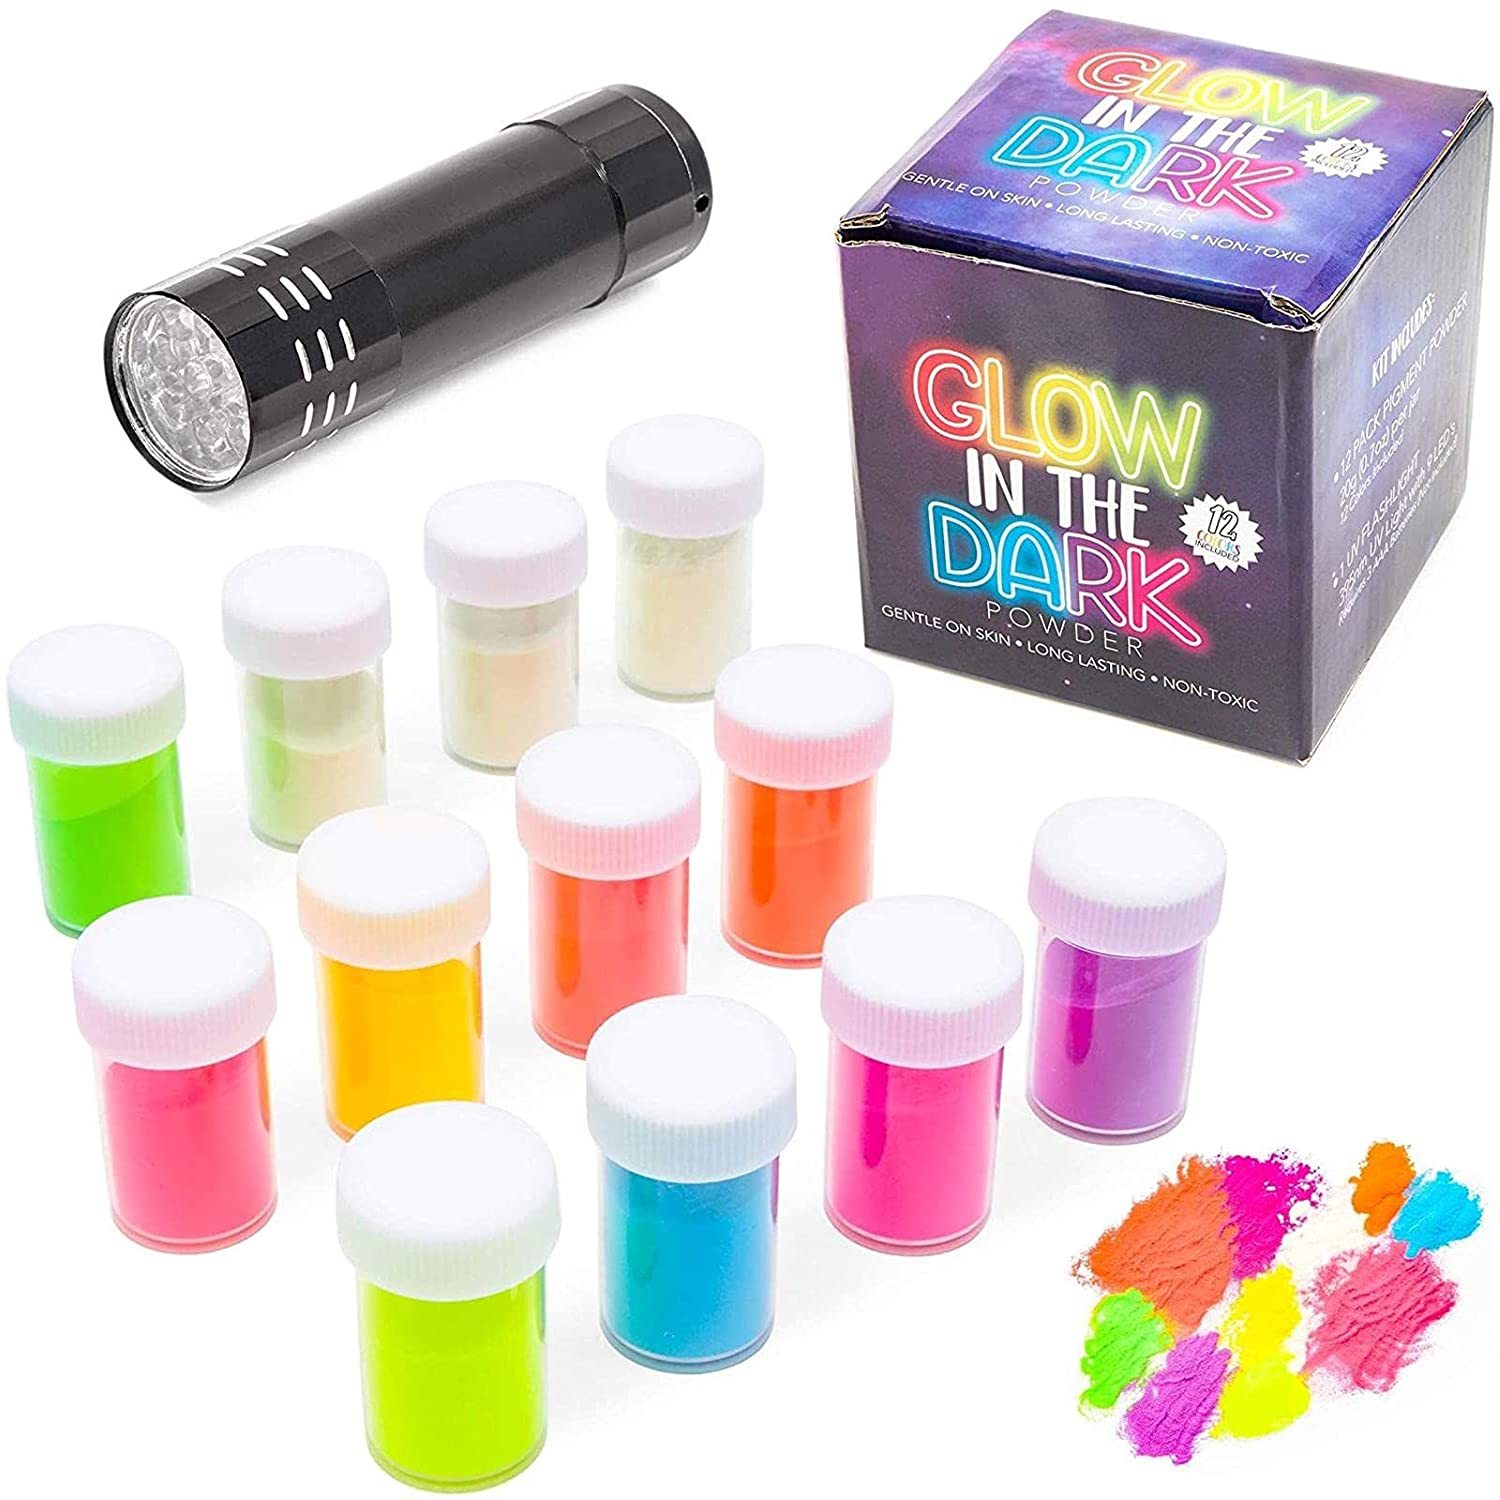 Glow In The Dark Pigment Powder With Uv Lamp (Pack Of 13, Assorted)